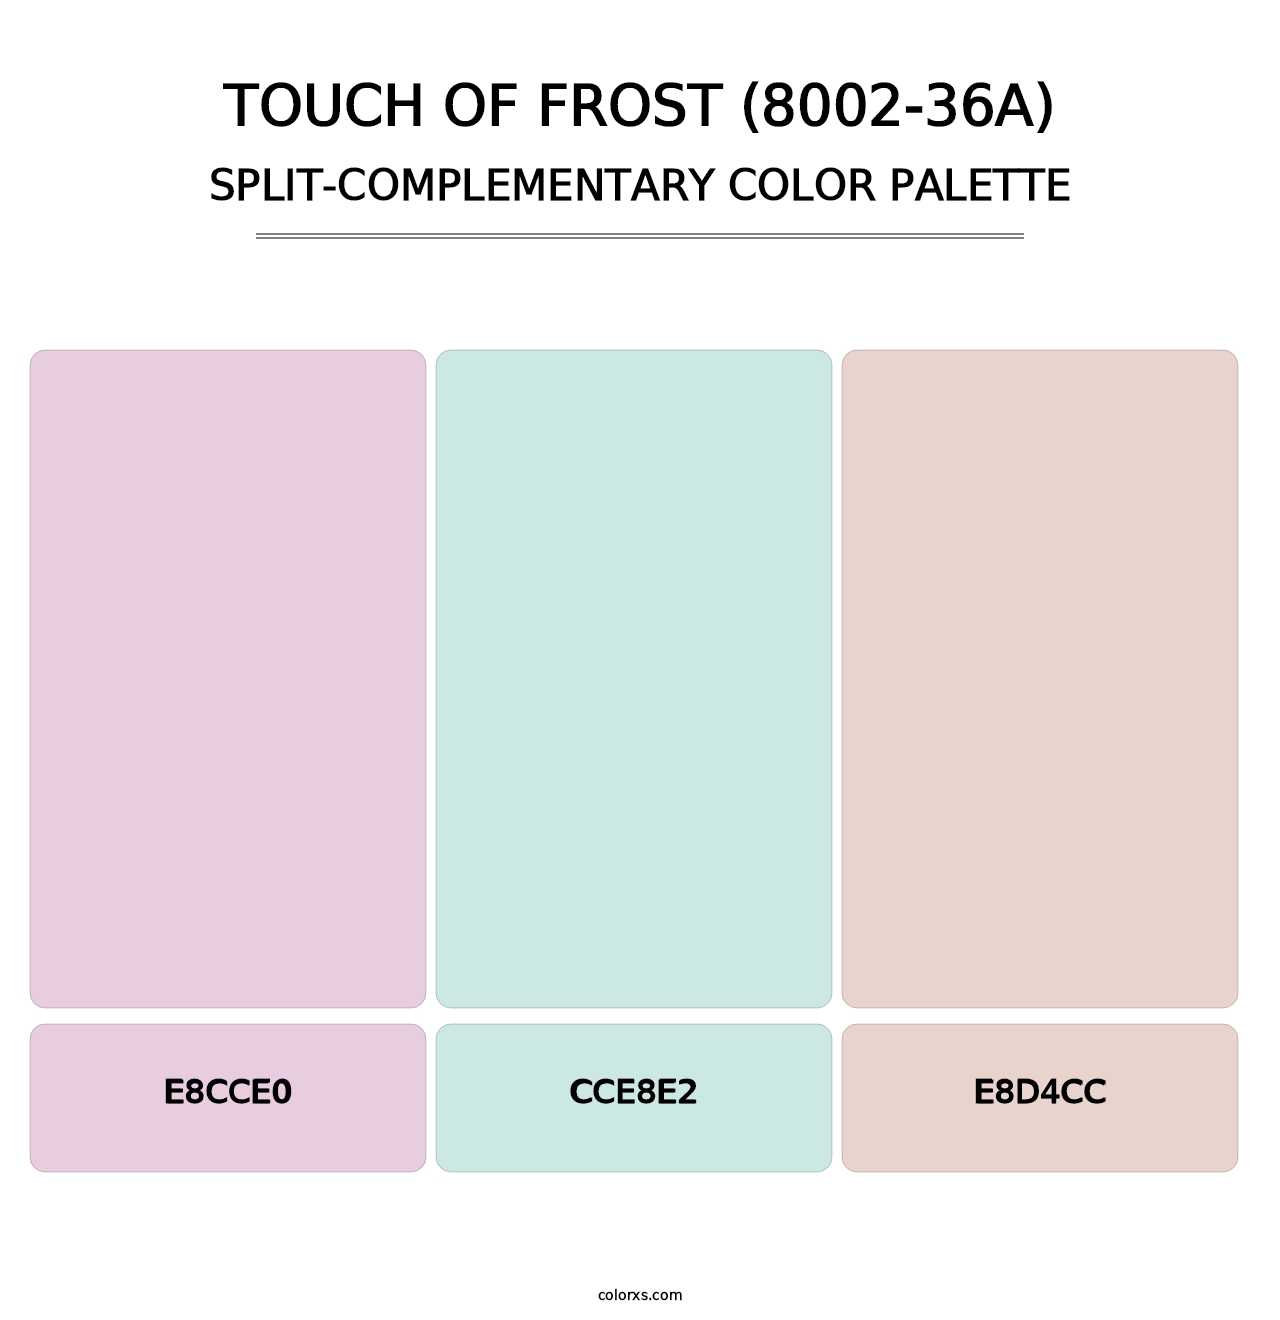 Touch of Frost (8002-36A) - Split-Complementary Color Palette